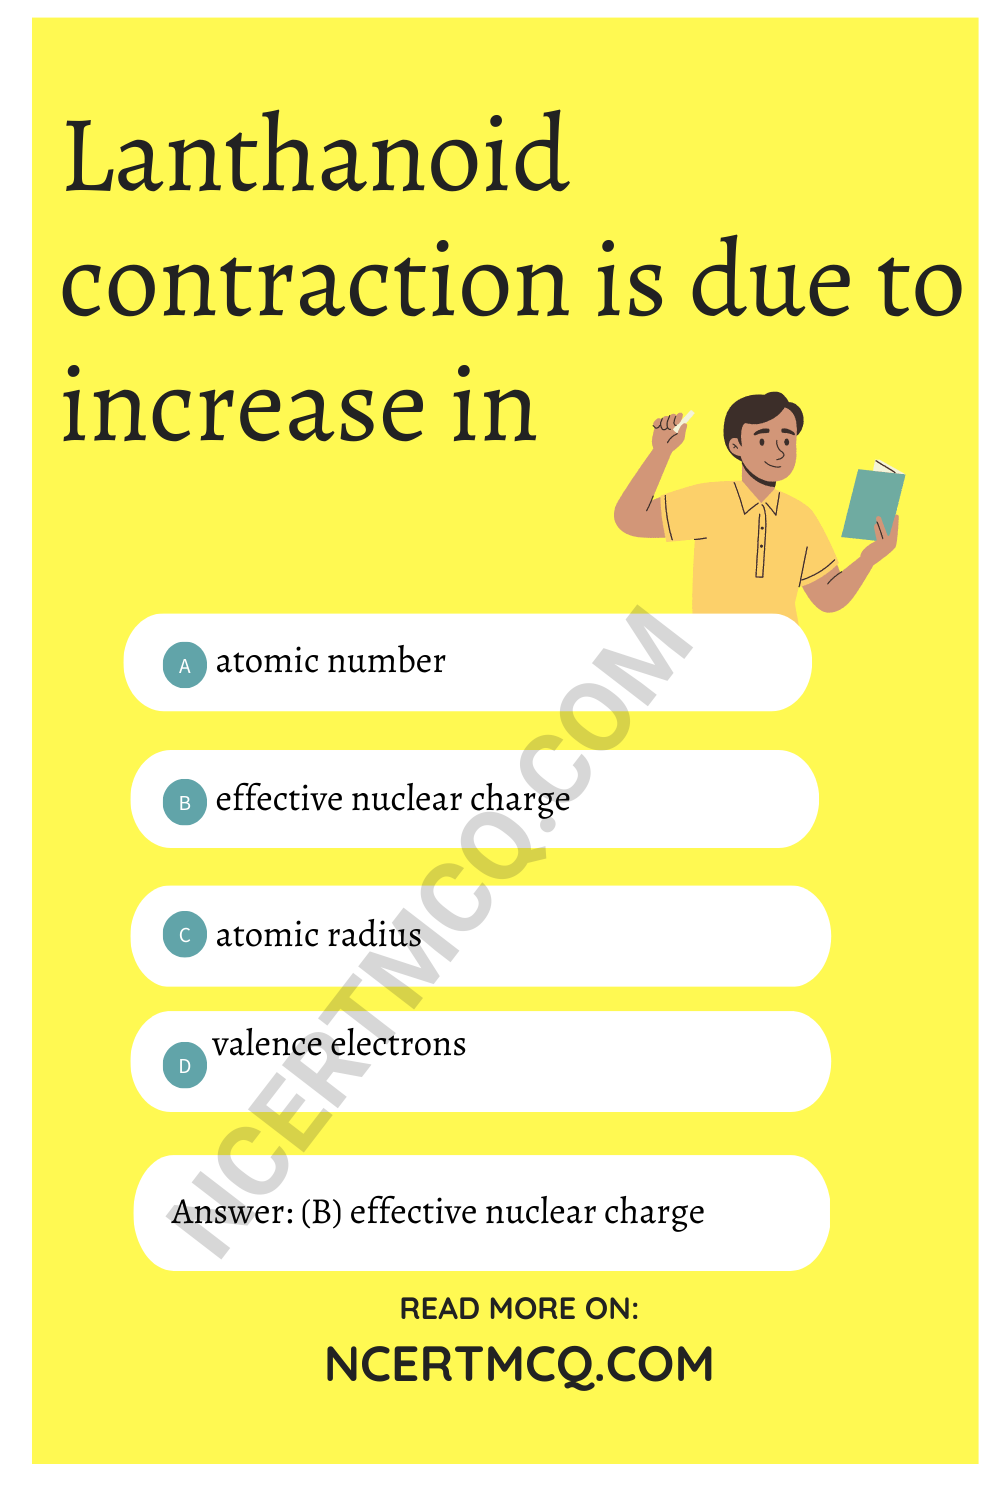 Lanthanoid contraction is due to increase in